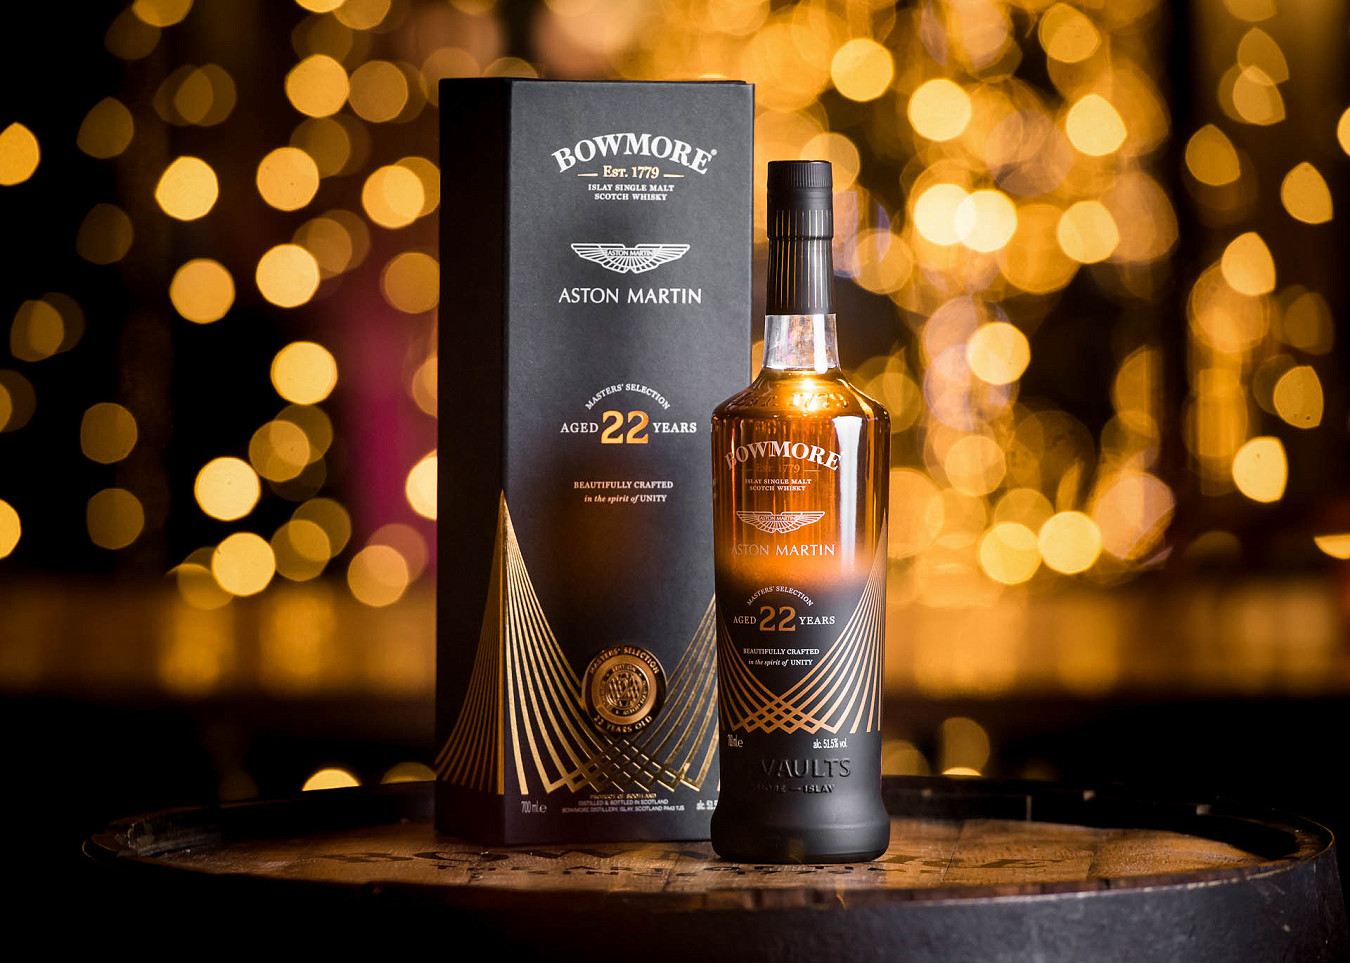 Photo of Bowmore Aston Martin 22 year Old Bottle with it's box, with bokeh lighting background